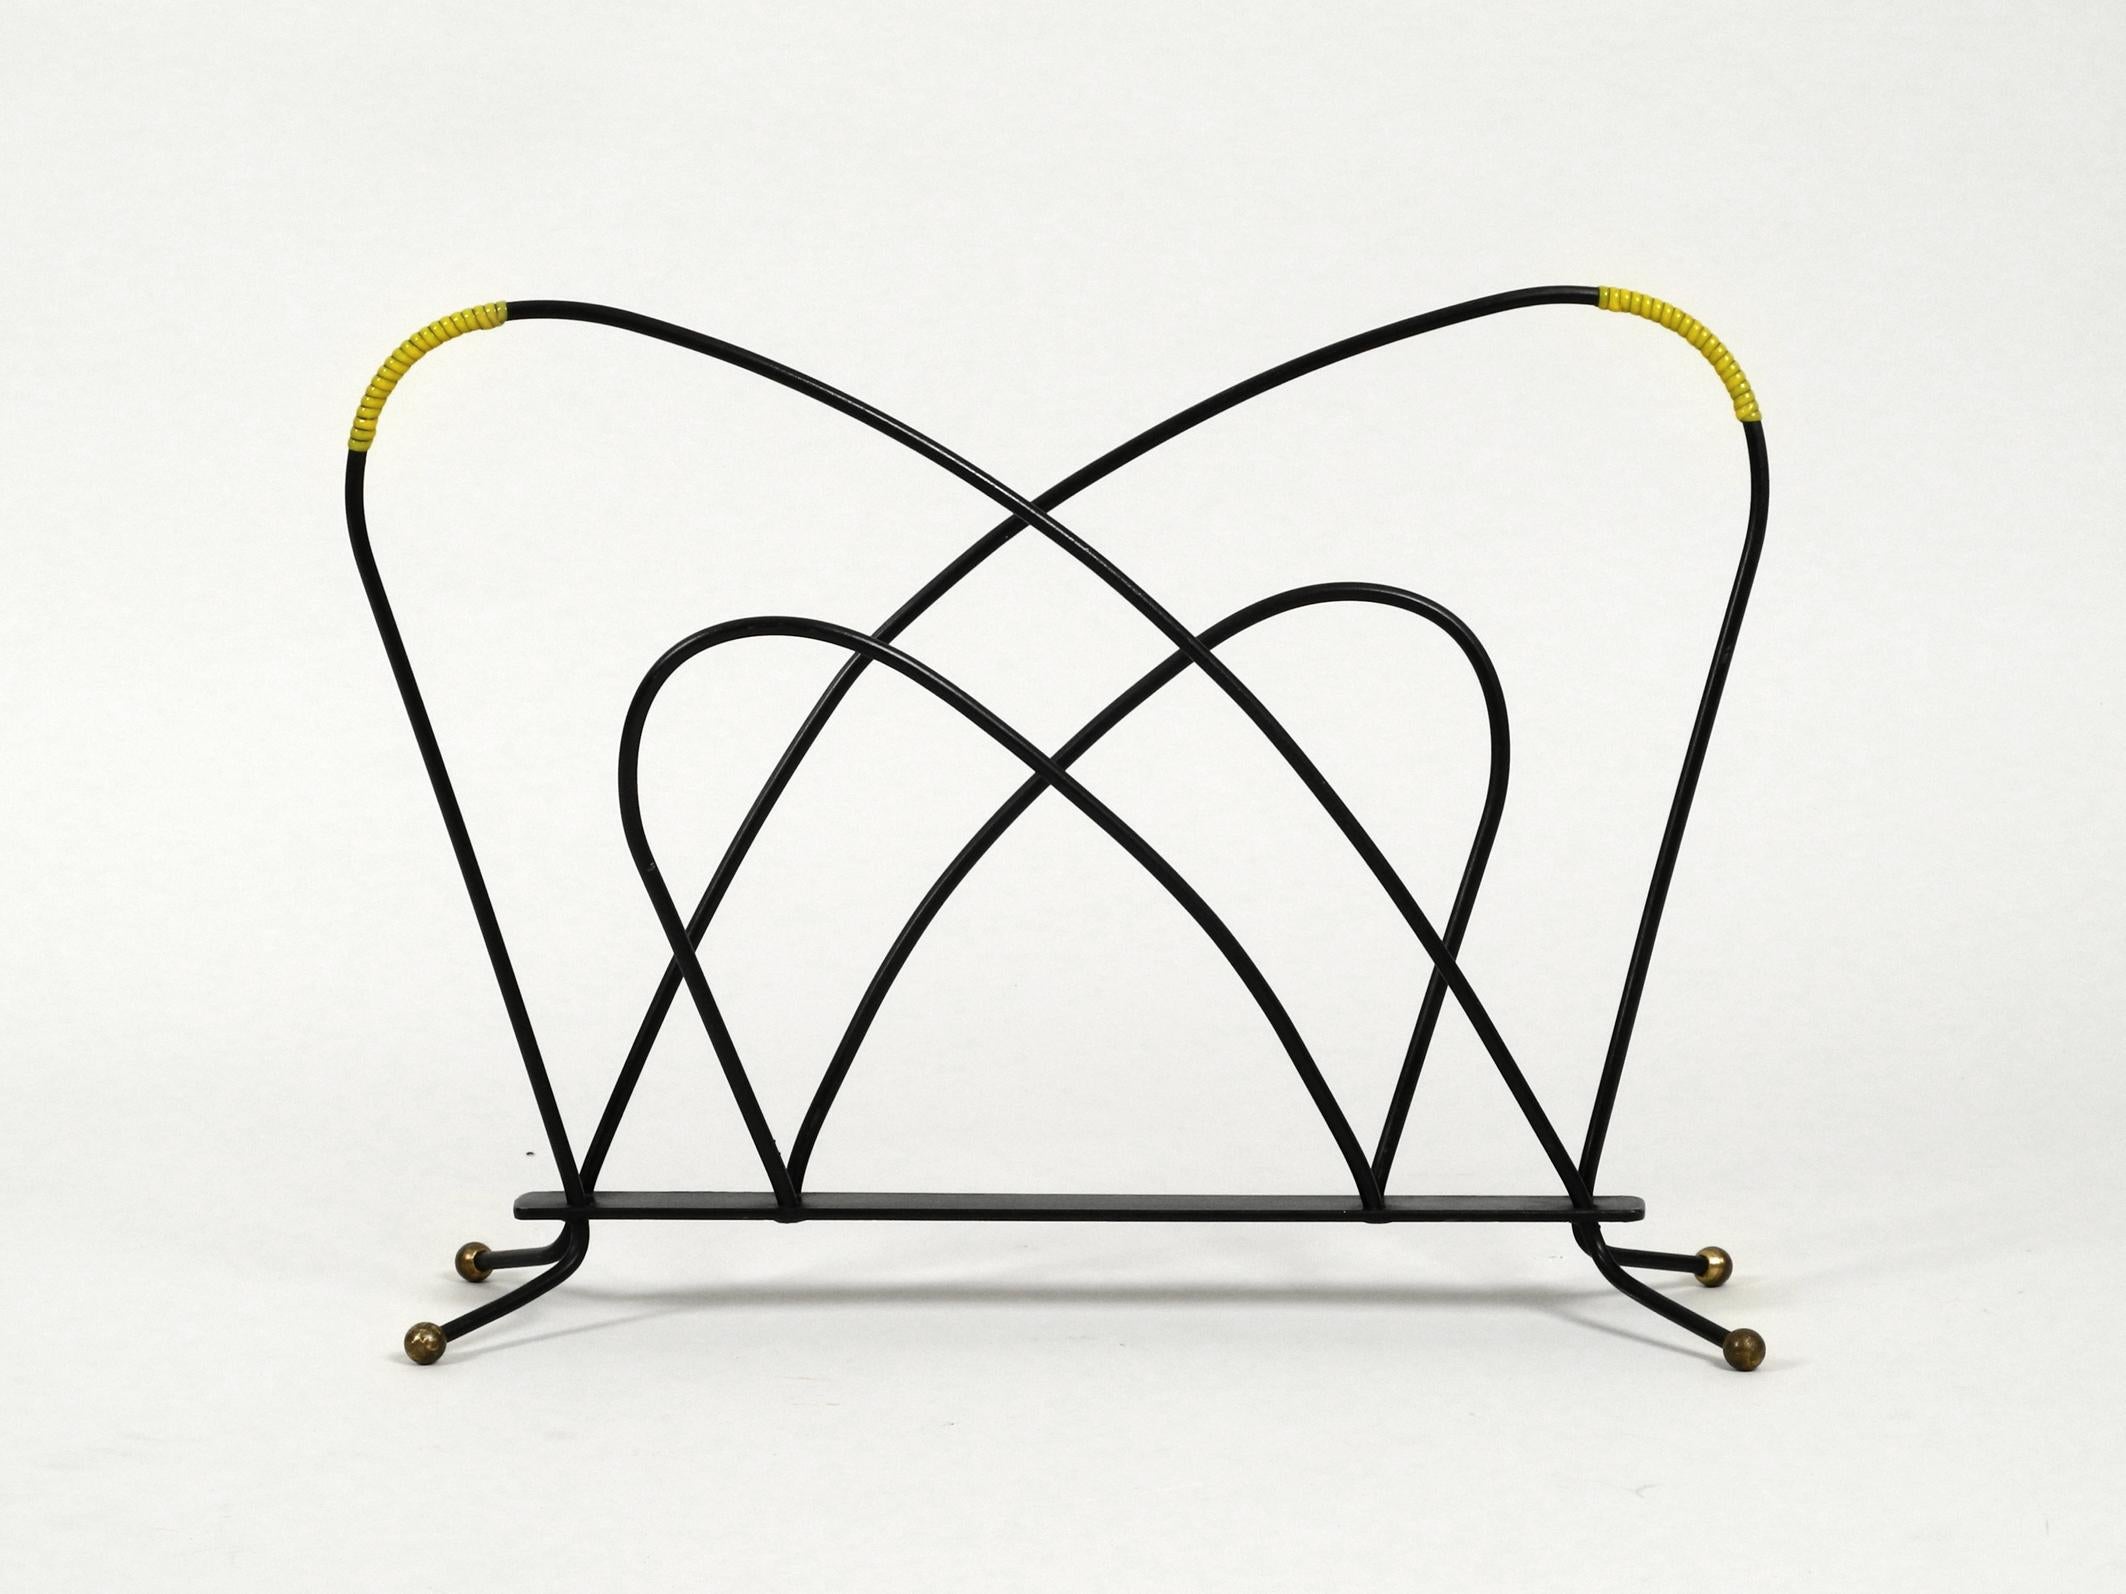 Beautiful and rare original Mid-Century Modern
newspaper or magazine rack made of black metal frame and brass ball feet.
Very high quality interesting Minimalist 1950s streamline design.
In very good vintage condition. No damages, not